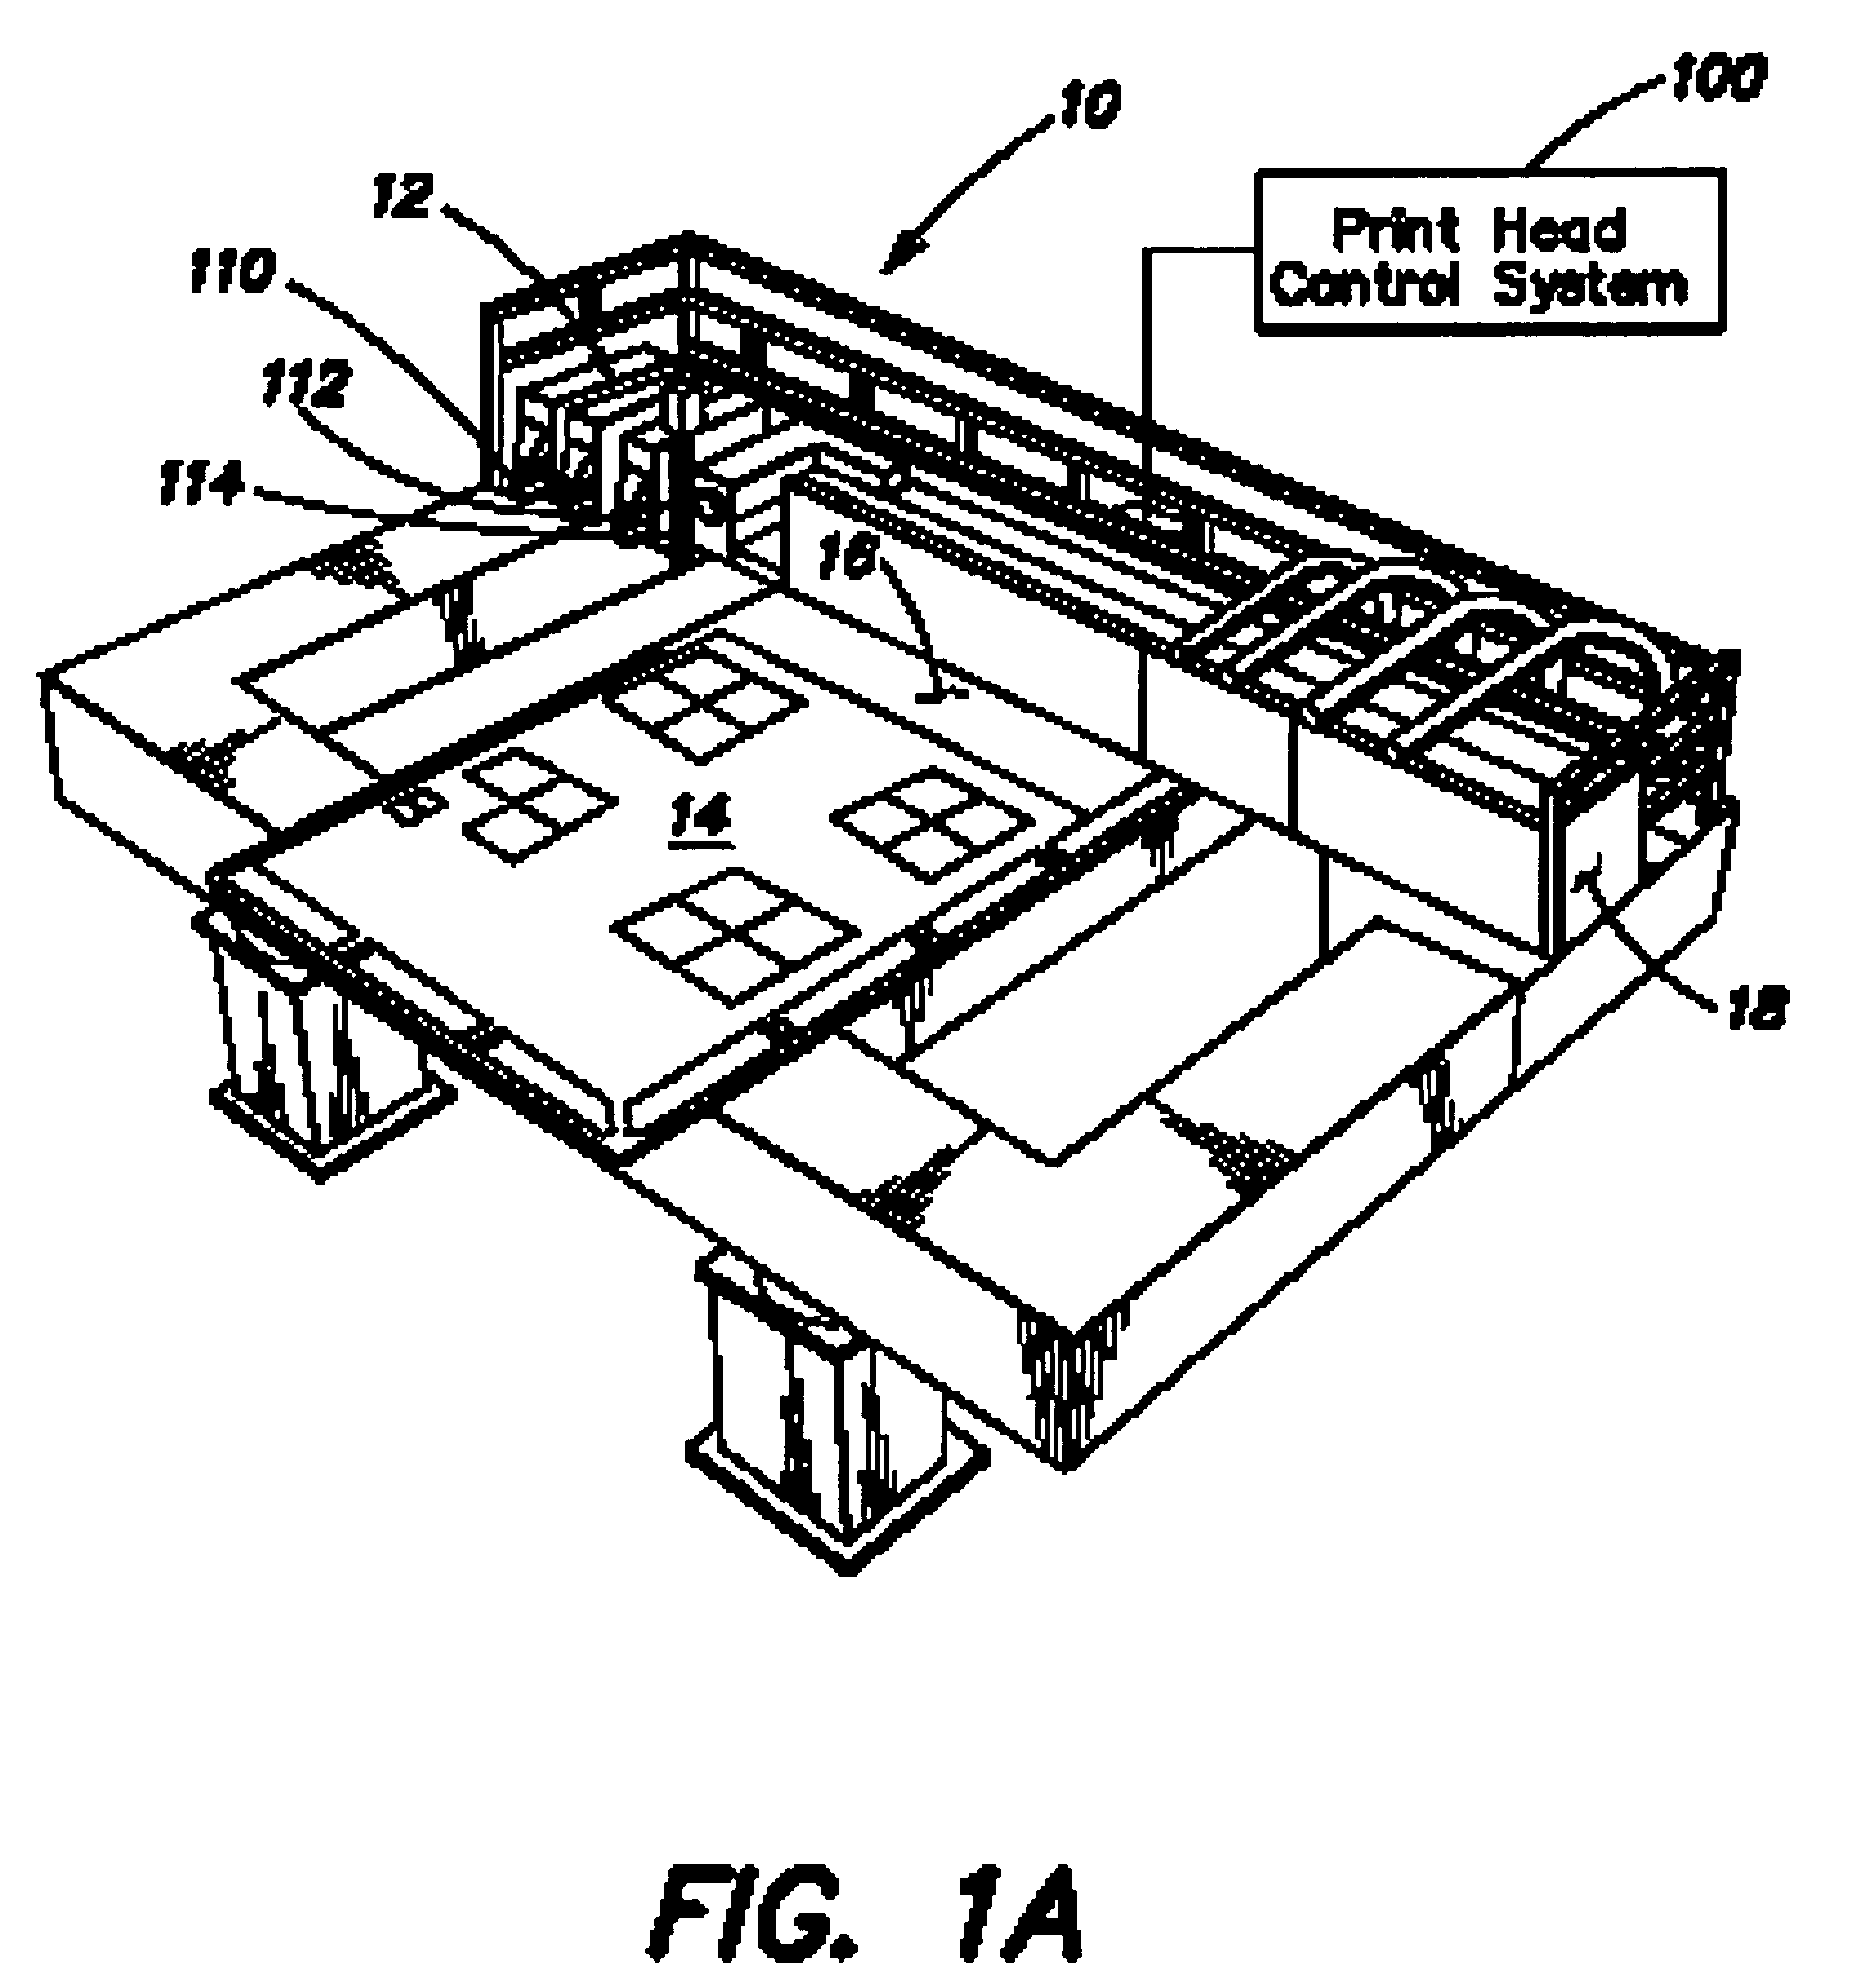 Methods and apparatus for precision control of print head assemblies